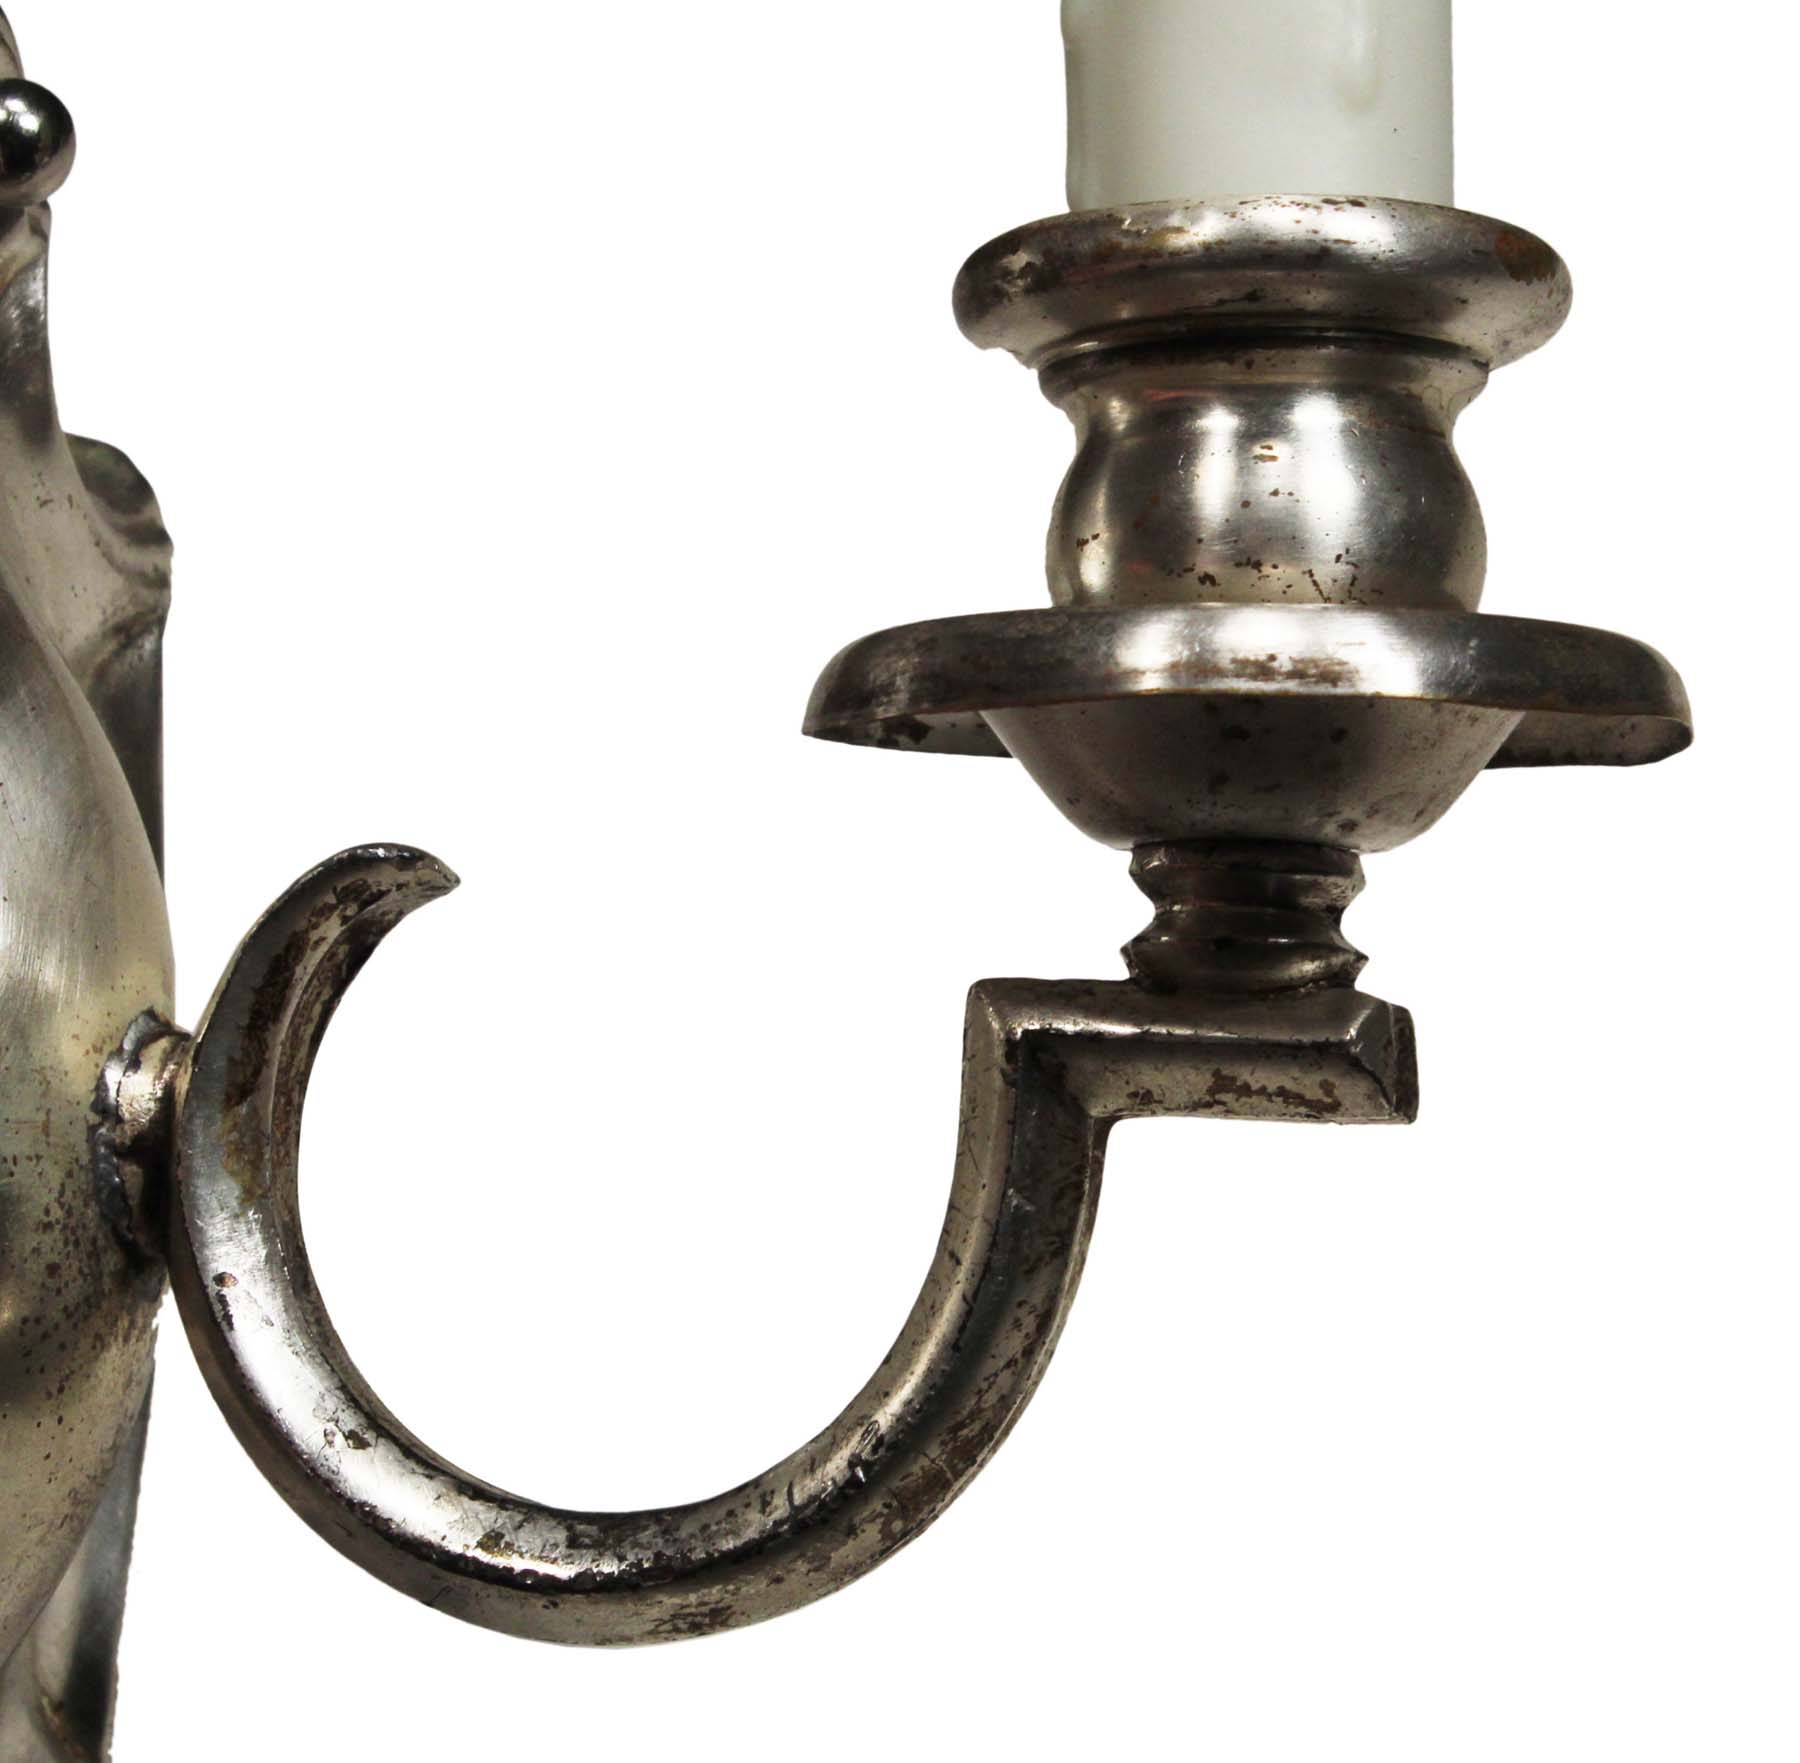 Antique Pair of Neoclassical Single-Arm Sconces, Silver-Plated-68347